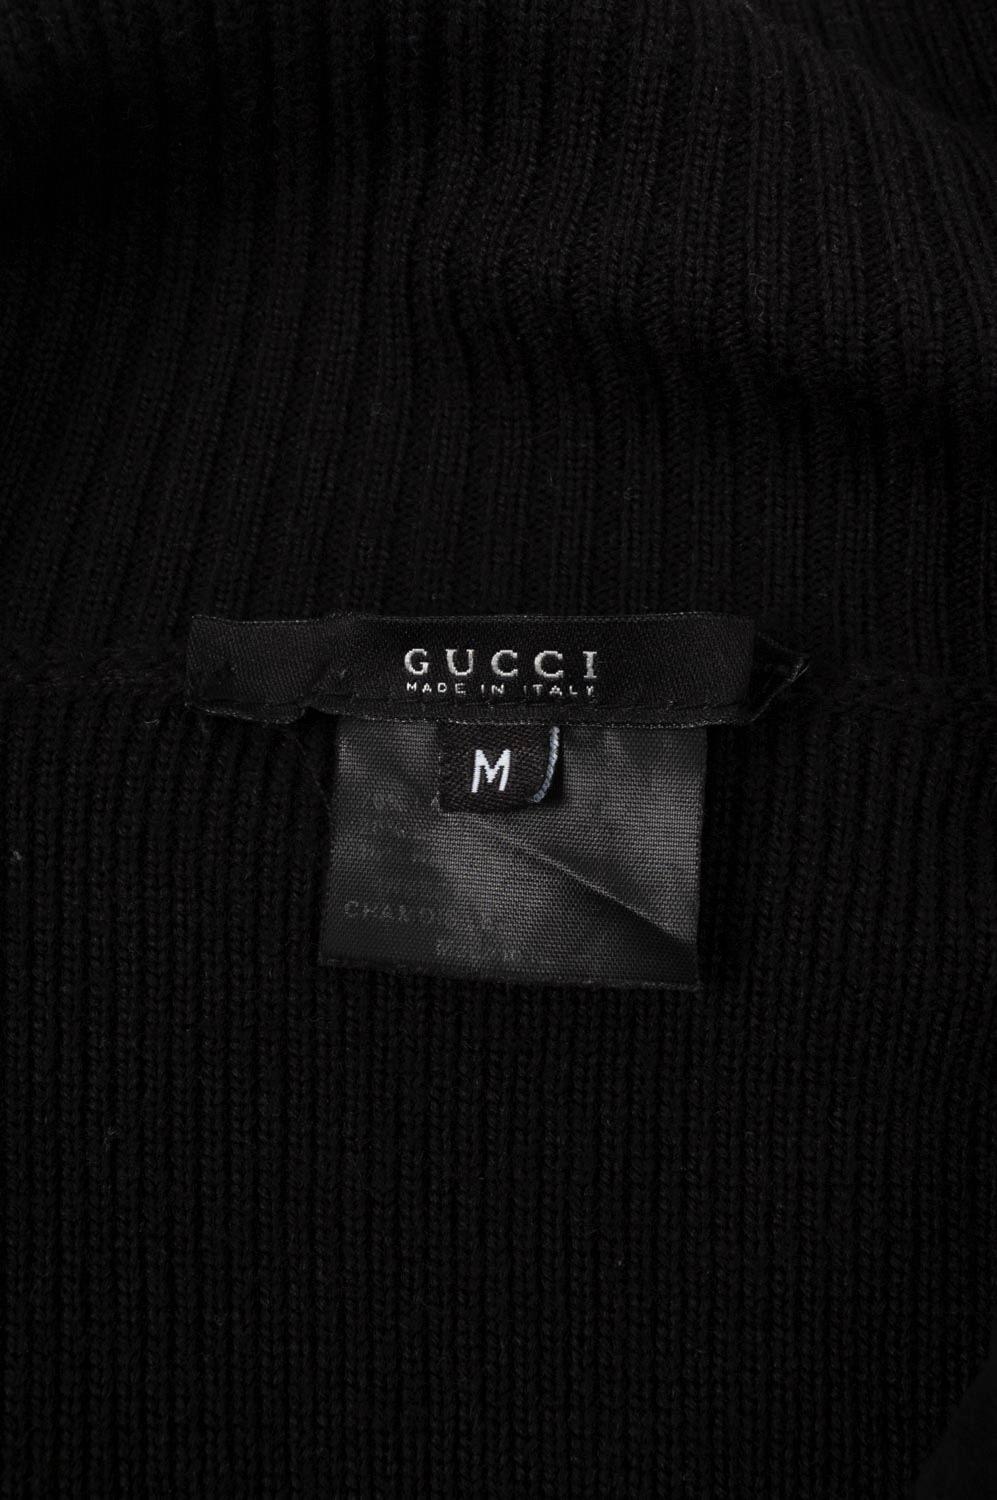 Gucci Men Sweater Front Suede Leather Part Size M S525 For Sale 2